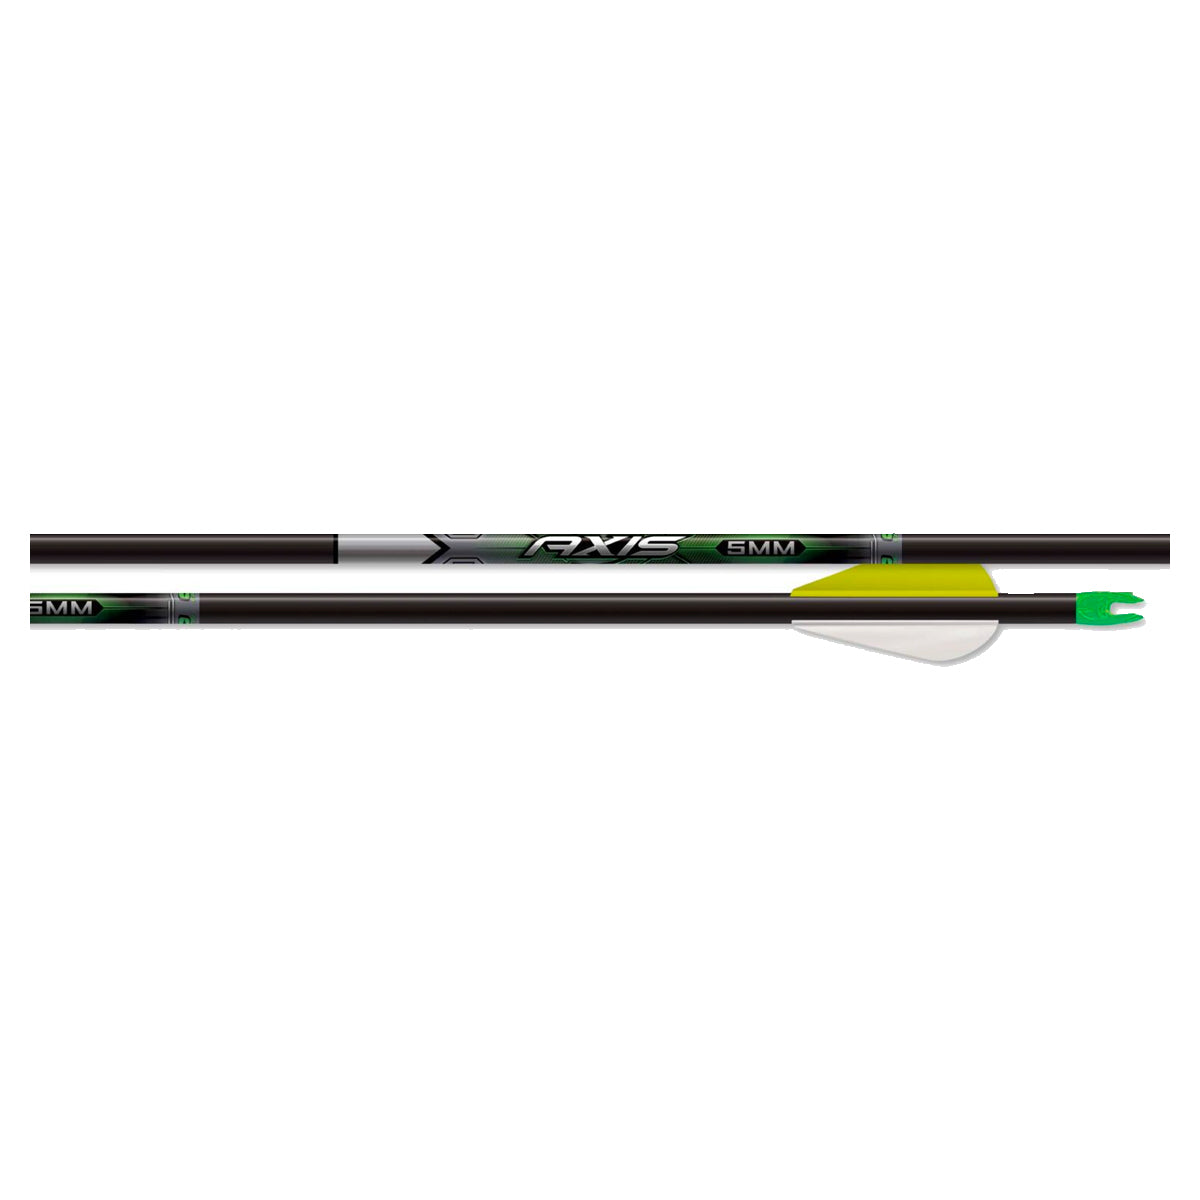 Easton 5mm Axis Pre-Fletched Arrows - 6 Count